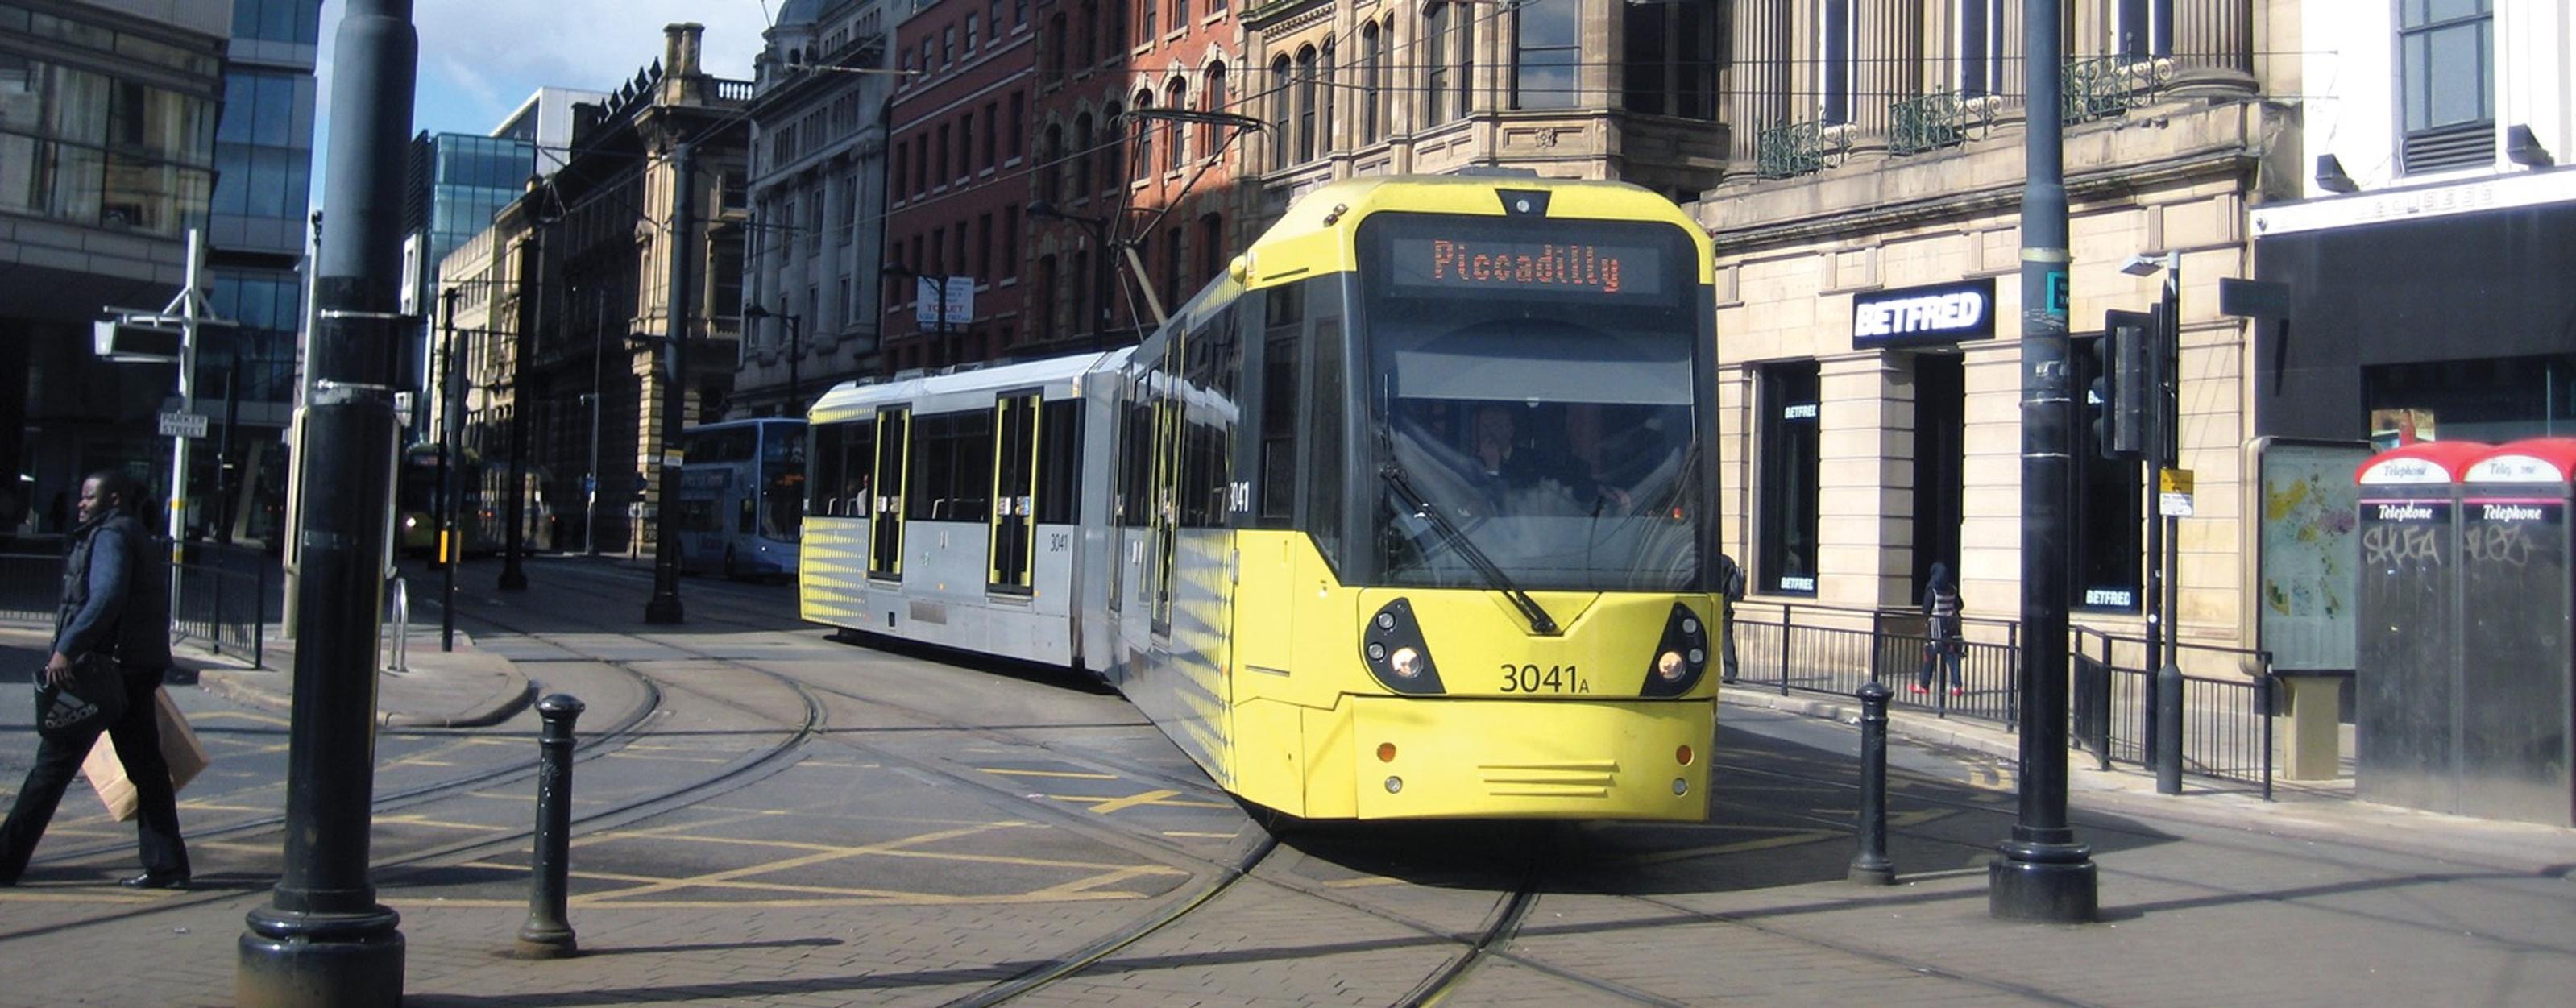 Young people under the age of 18 are responsible for 20% of all fare evasion on the Metrolink in Greater Manchester